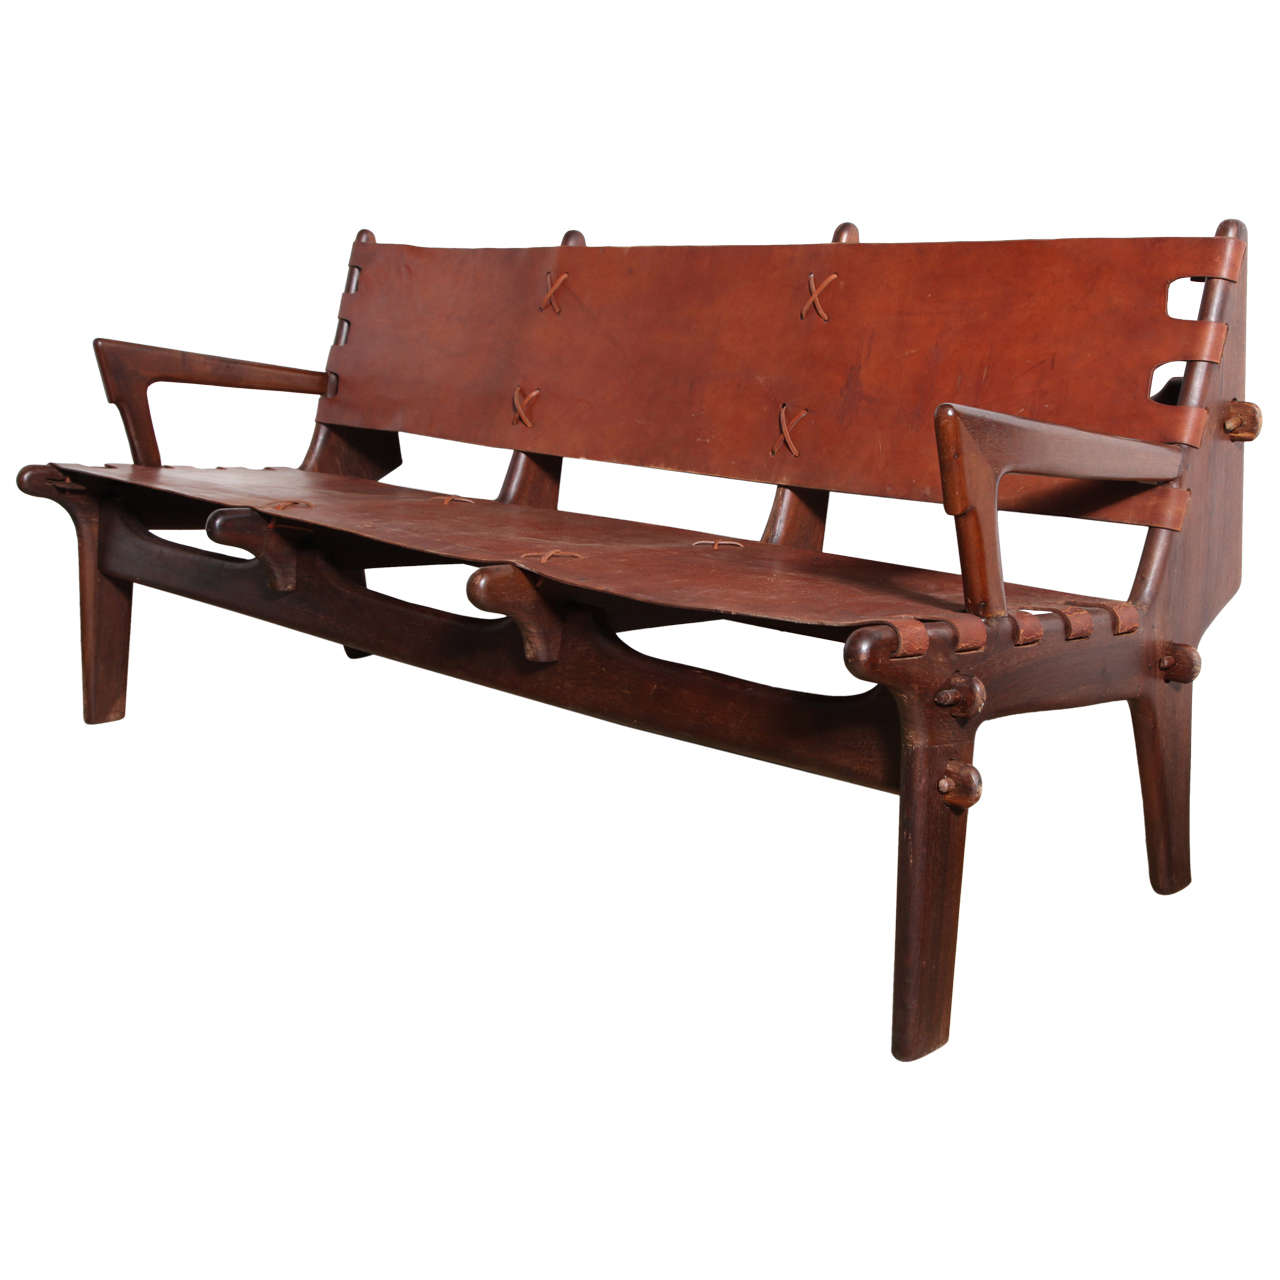 Angel Pazmino Three-Seat Sofa in Rosewood & Leather, Made in Equador, 1960's For Sale